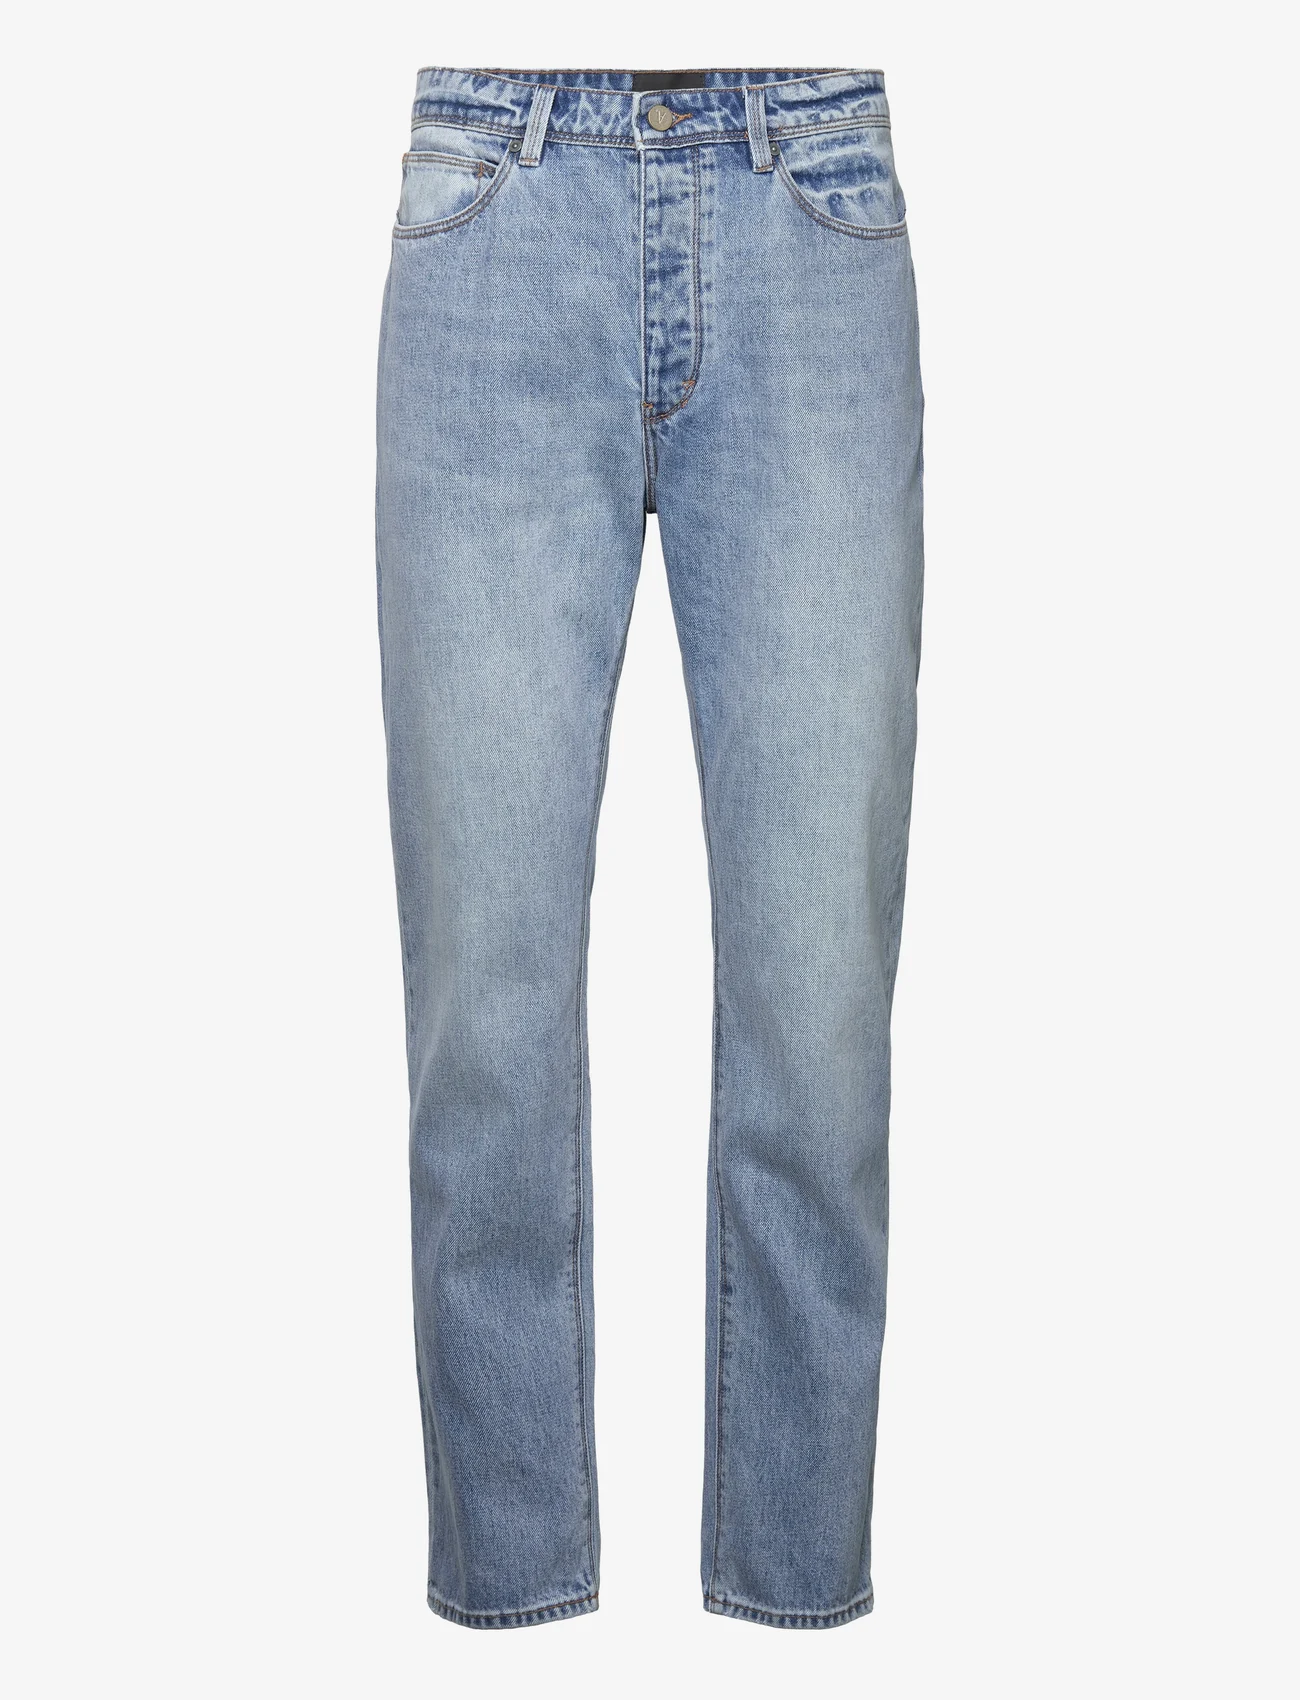 ABRAND - A 90s RELAXED OFFWORLD - loose jeans - blue - 1